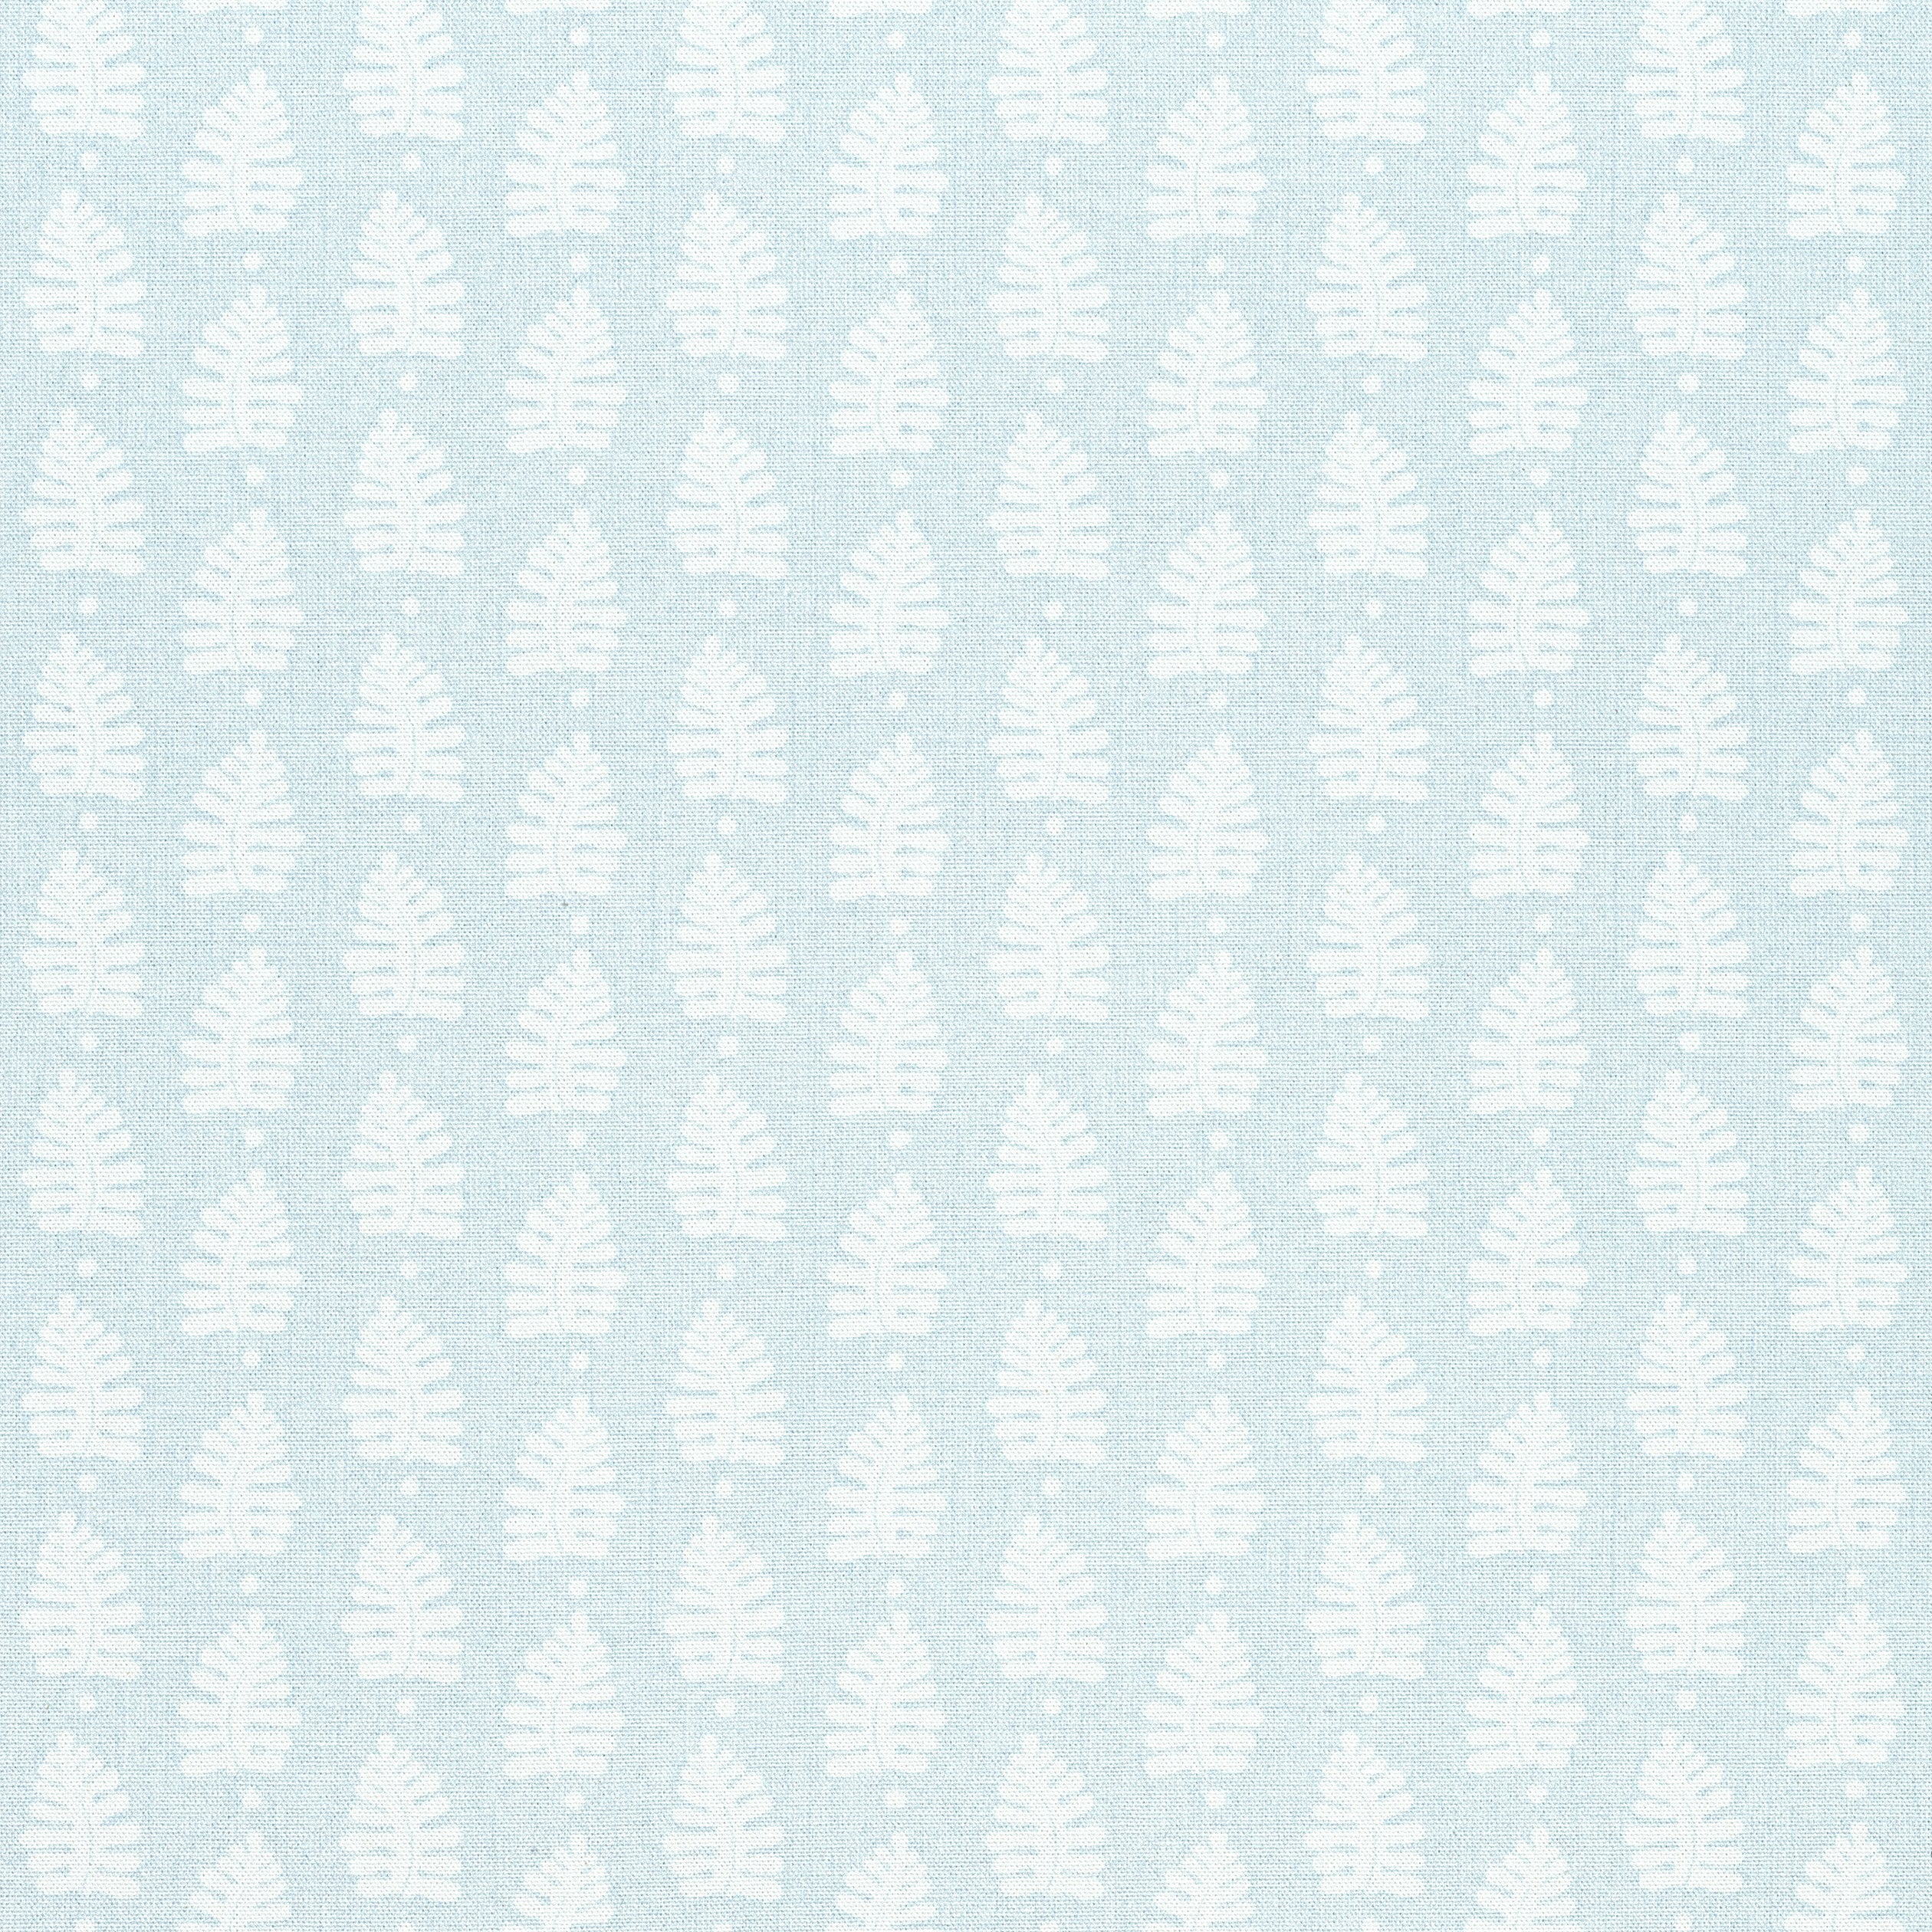 Ferndale fabric in spa blue color - pattern number F910656 - by Thibaut in the Ceylon collection